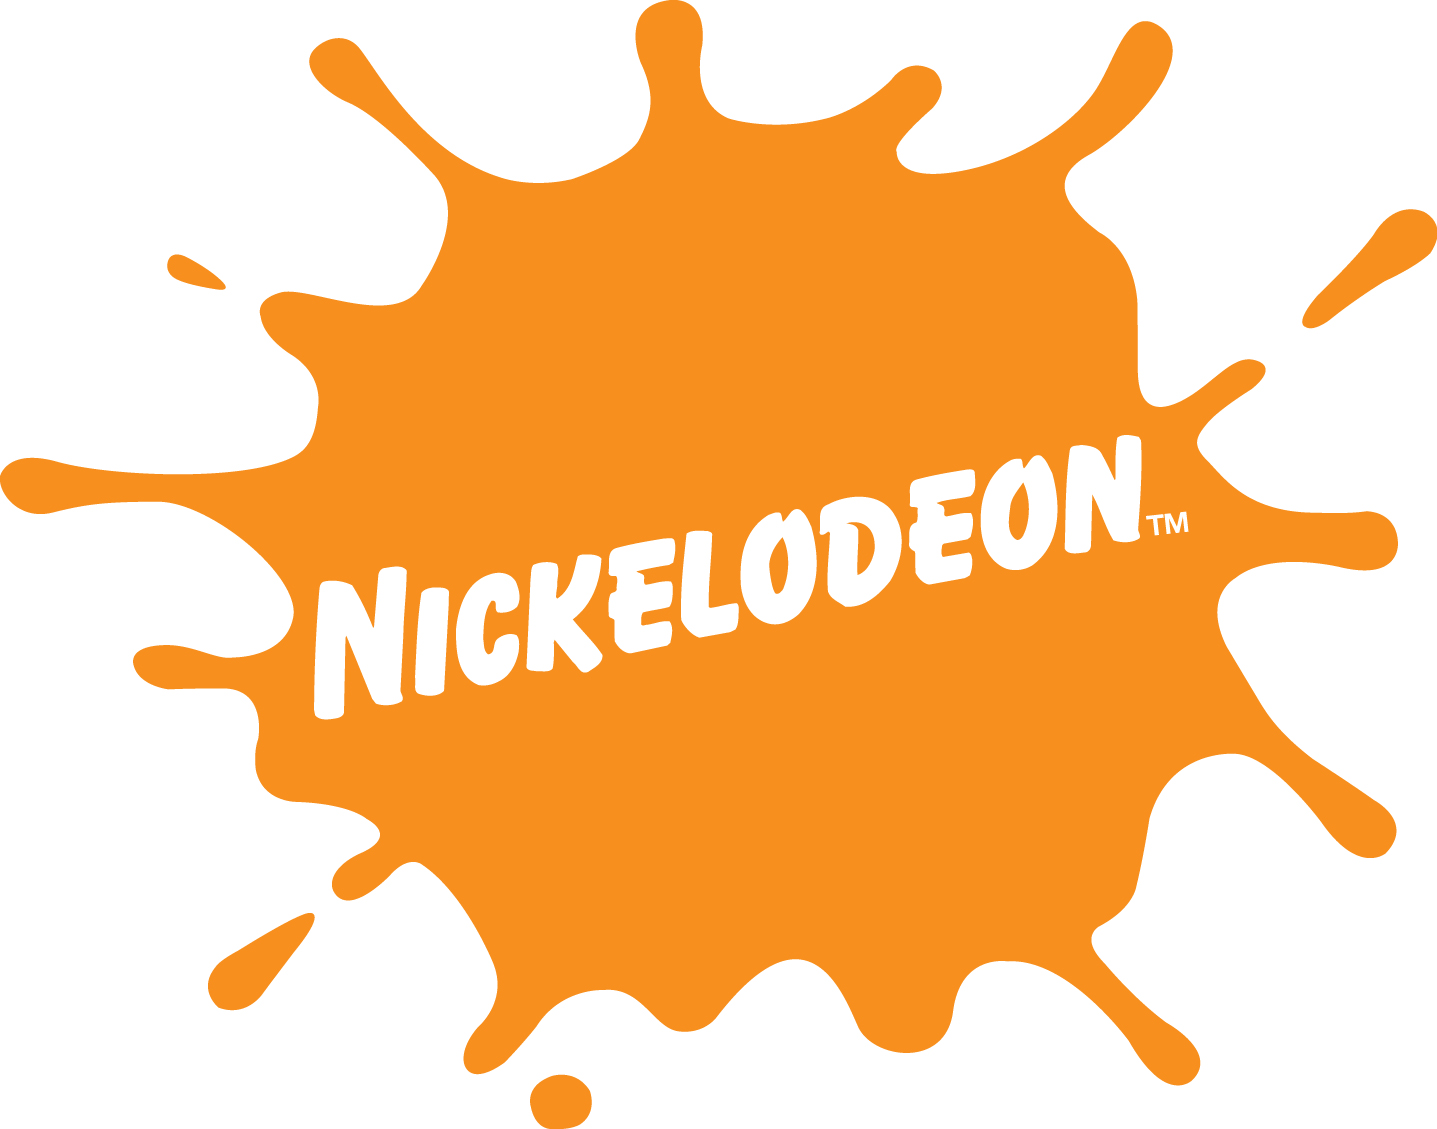 Nickelodeon launches animated shorts programme - TBI Vision